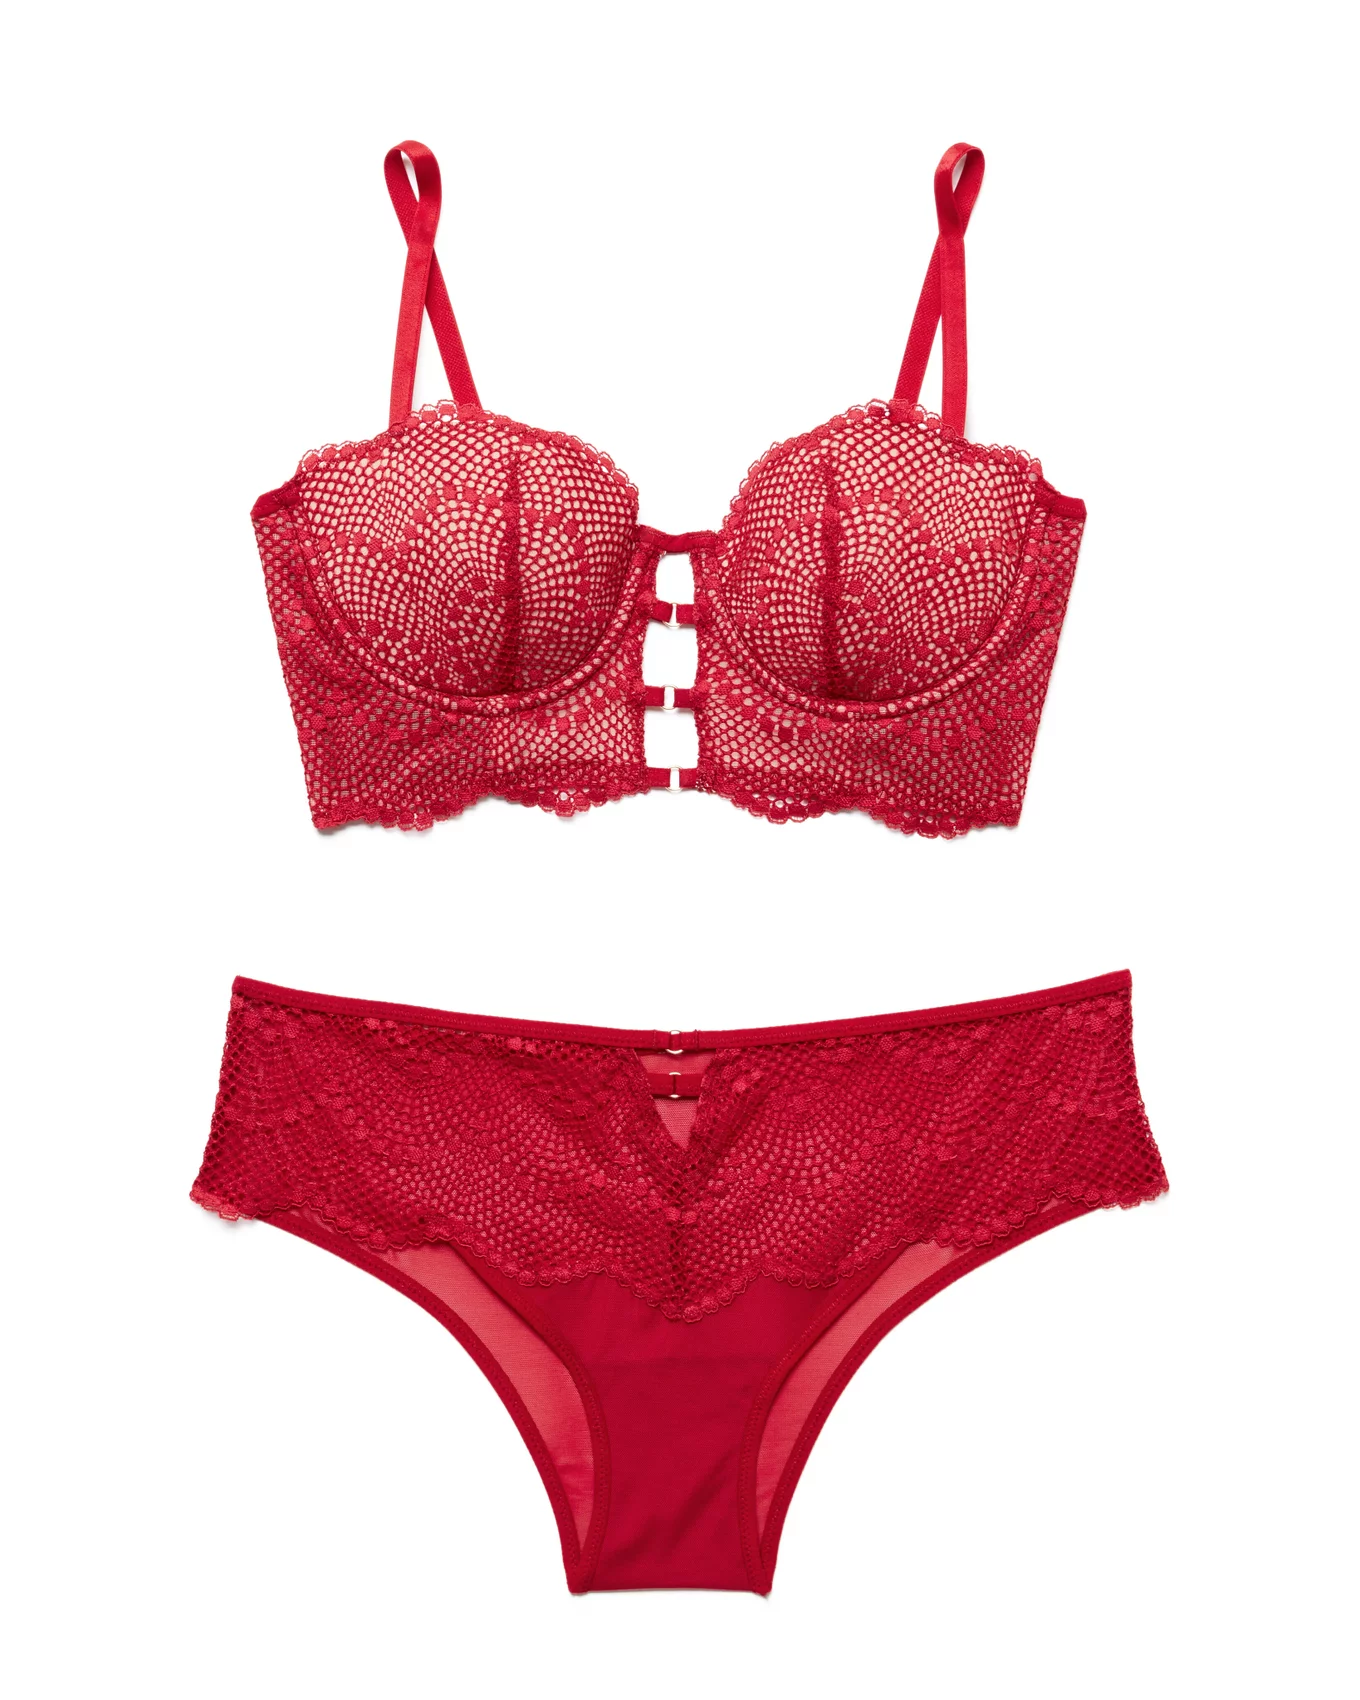 Balconette bra in gala apple red color Body Touch by Dim